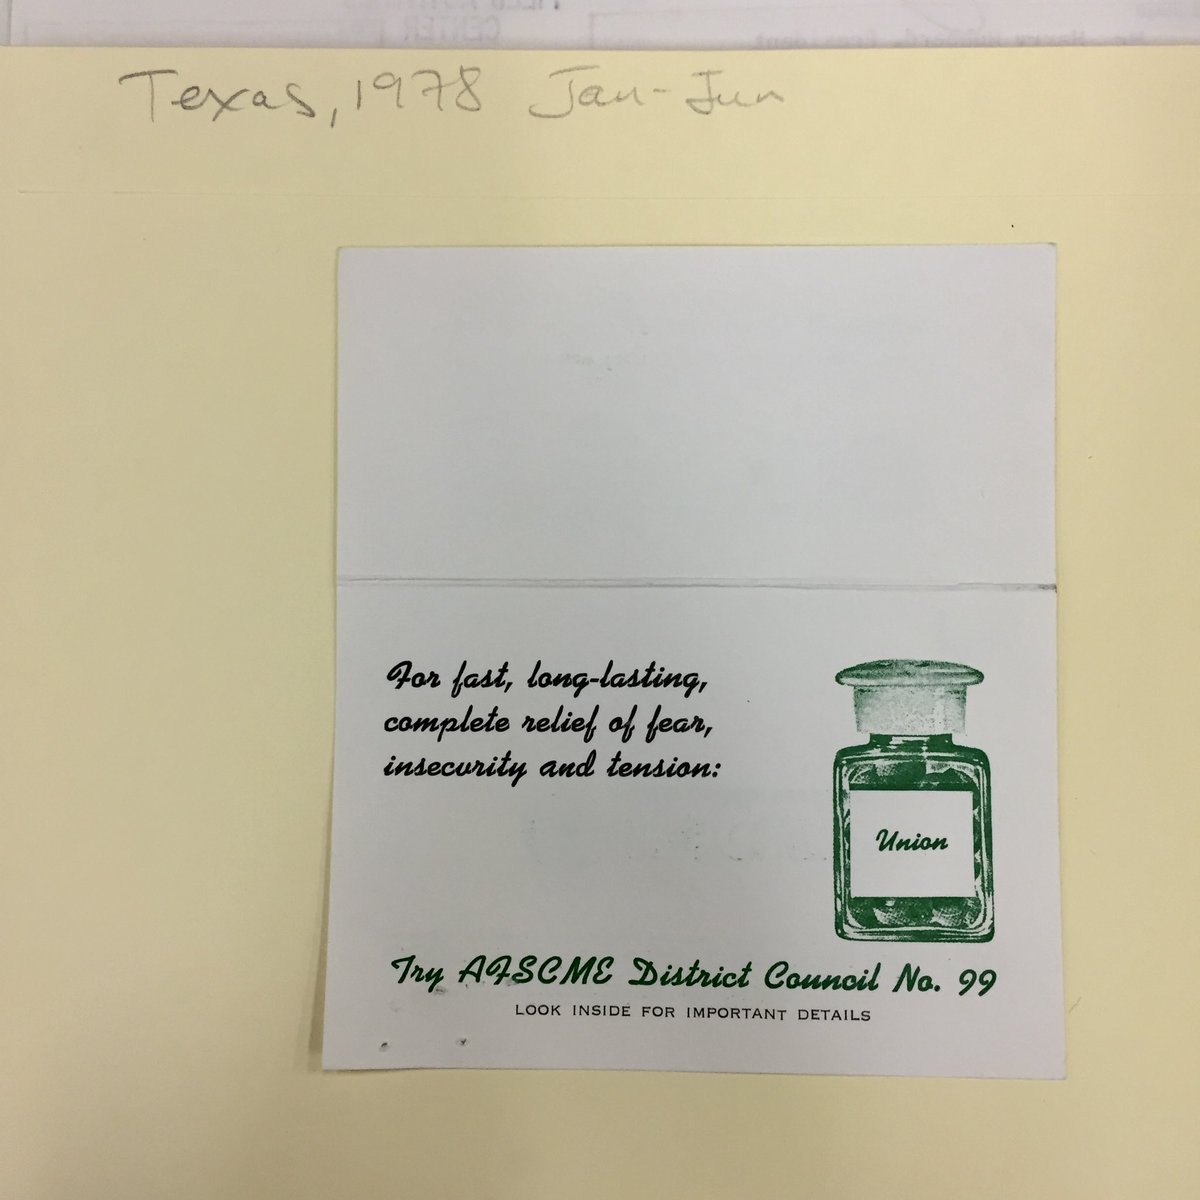 Happy to announce, at long last, the opening of the @AFSCME Organizing and Field Services Department records, bulk dates 1967-1980 at the @ReutherLibrary. archives.wayne.edu/repositories/2… The collection that brings you gems like this: